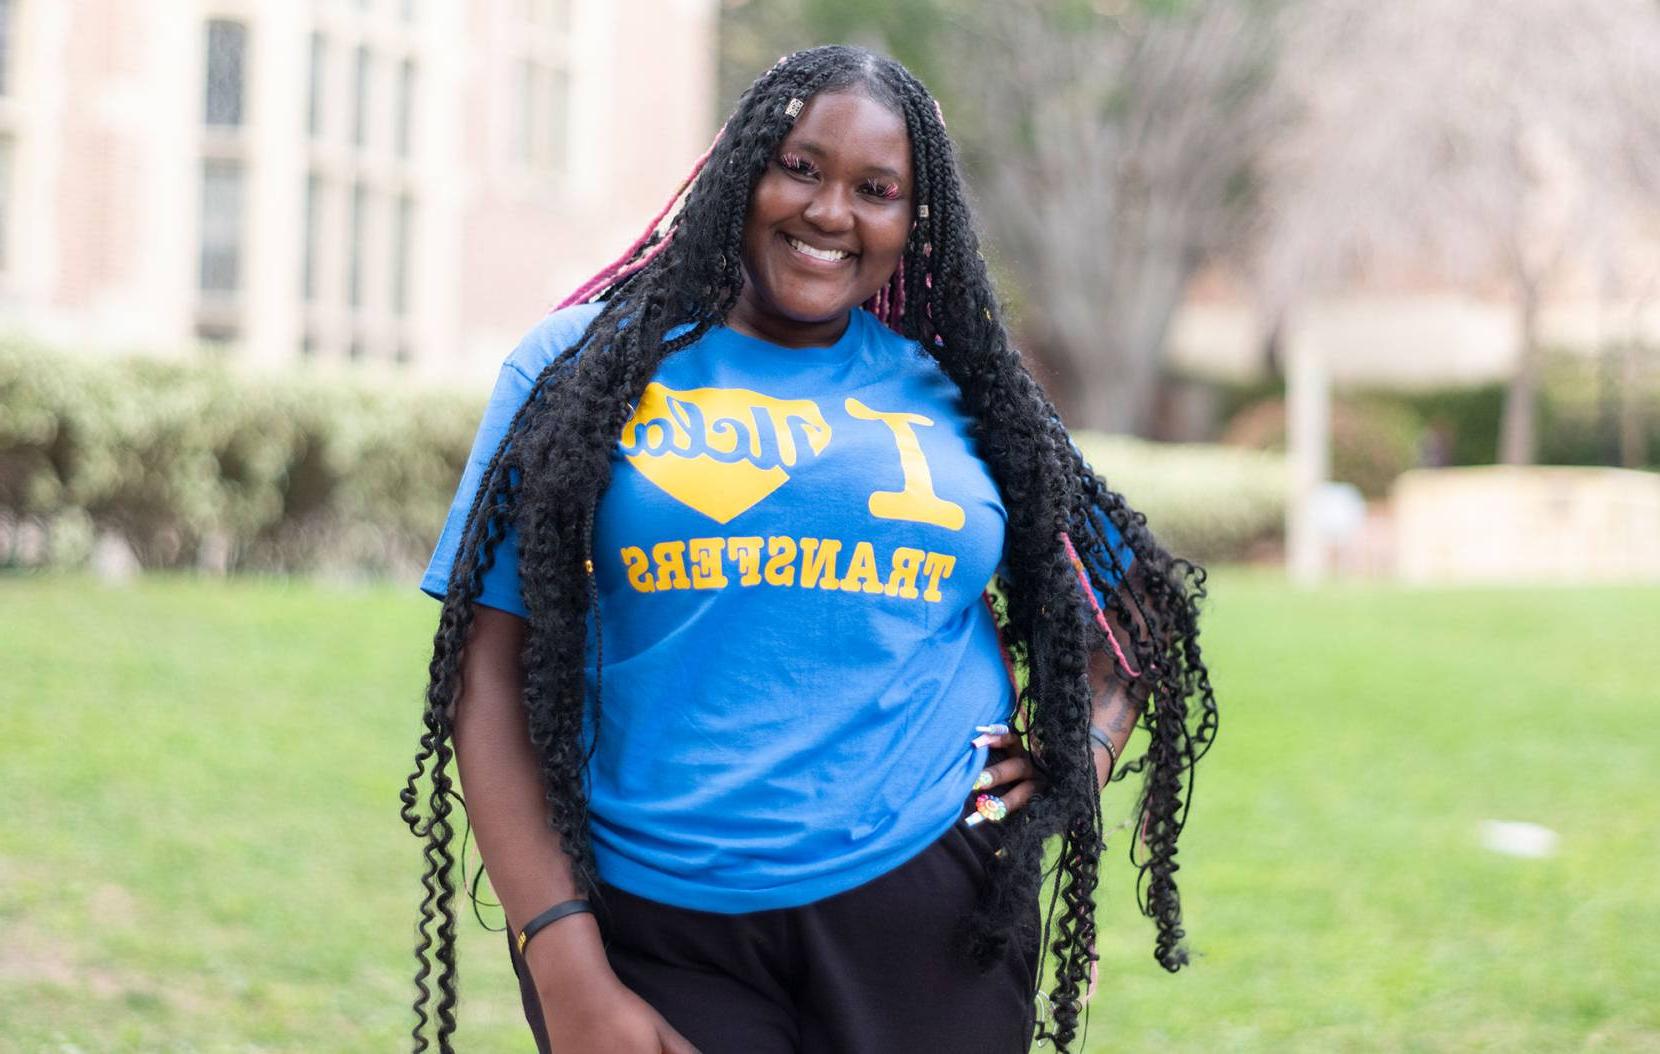 Student posing in a blue tshirt that says "I love UCLA transfers"